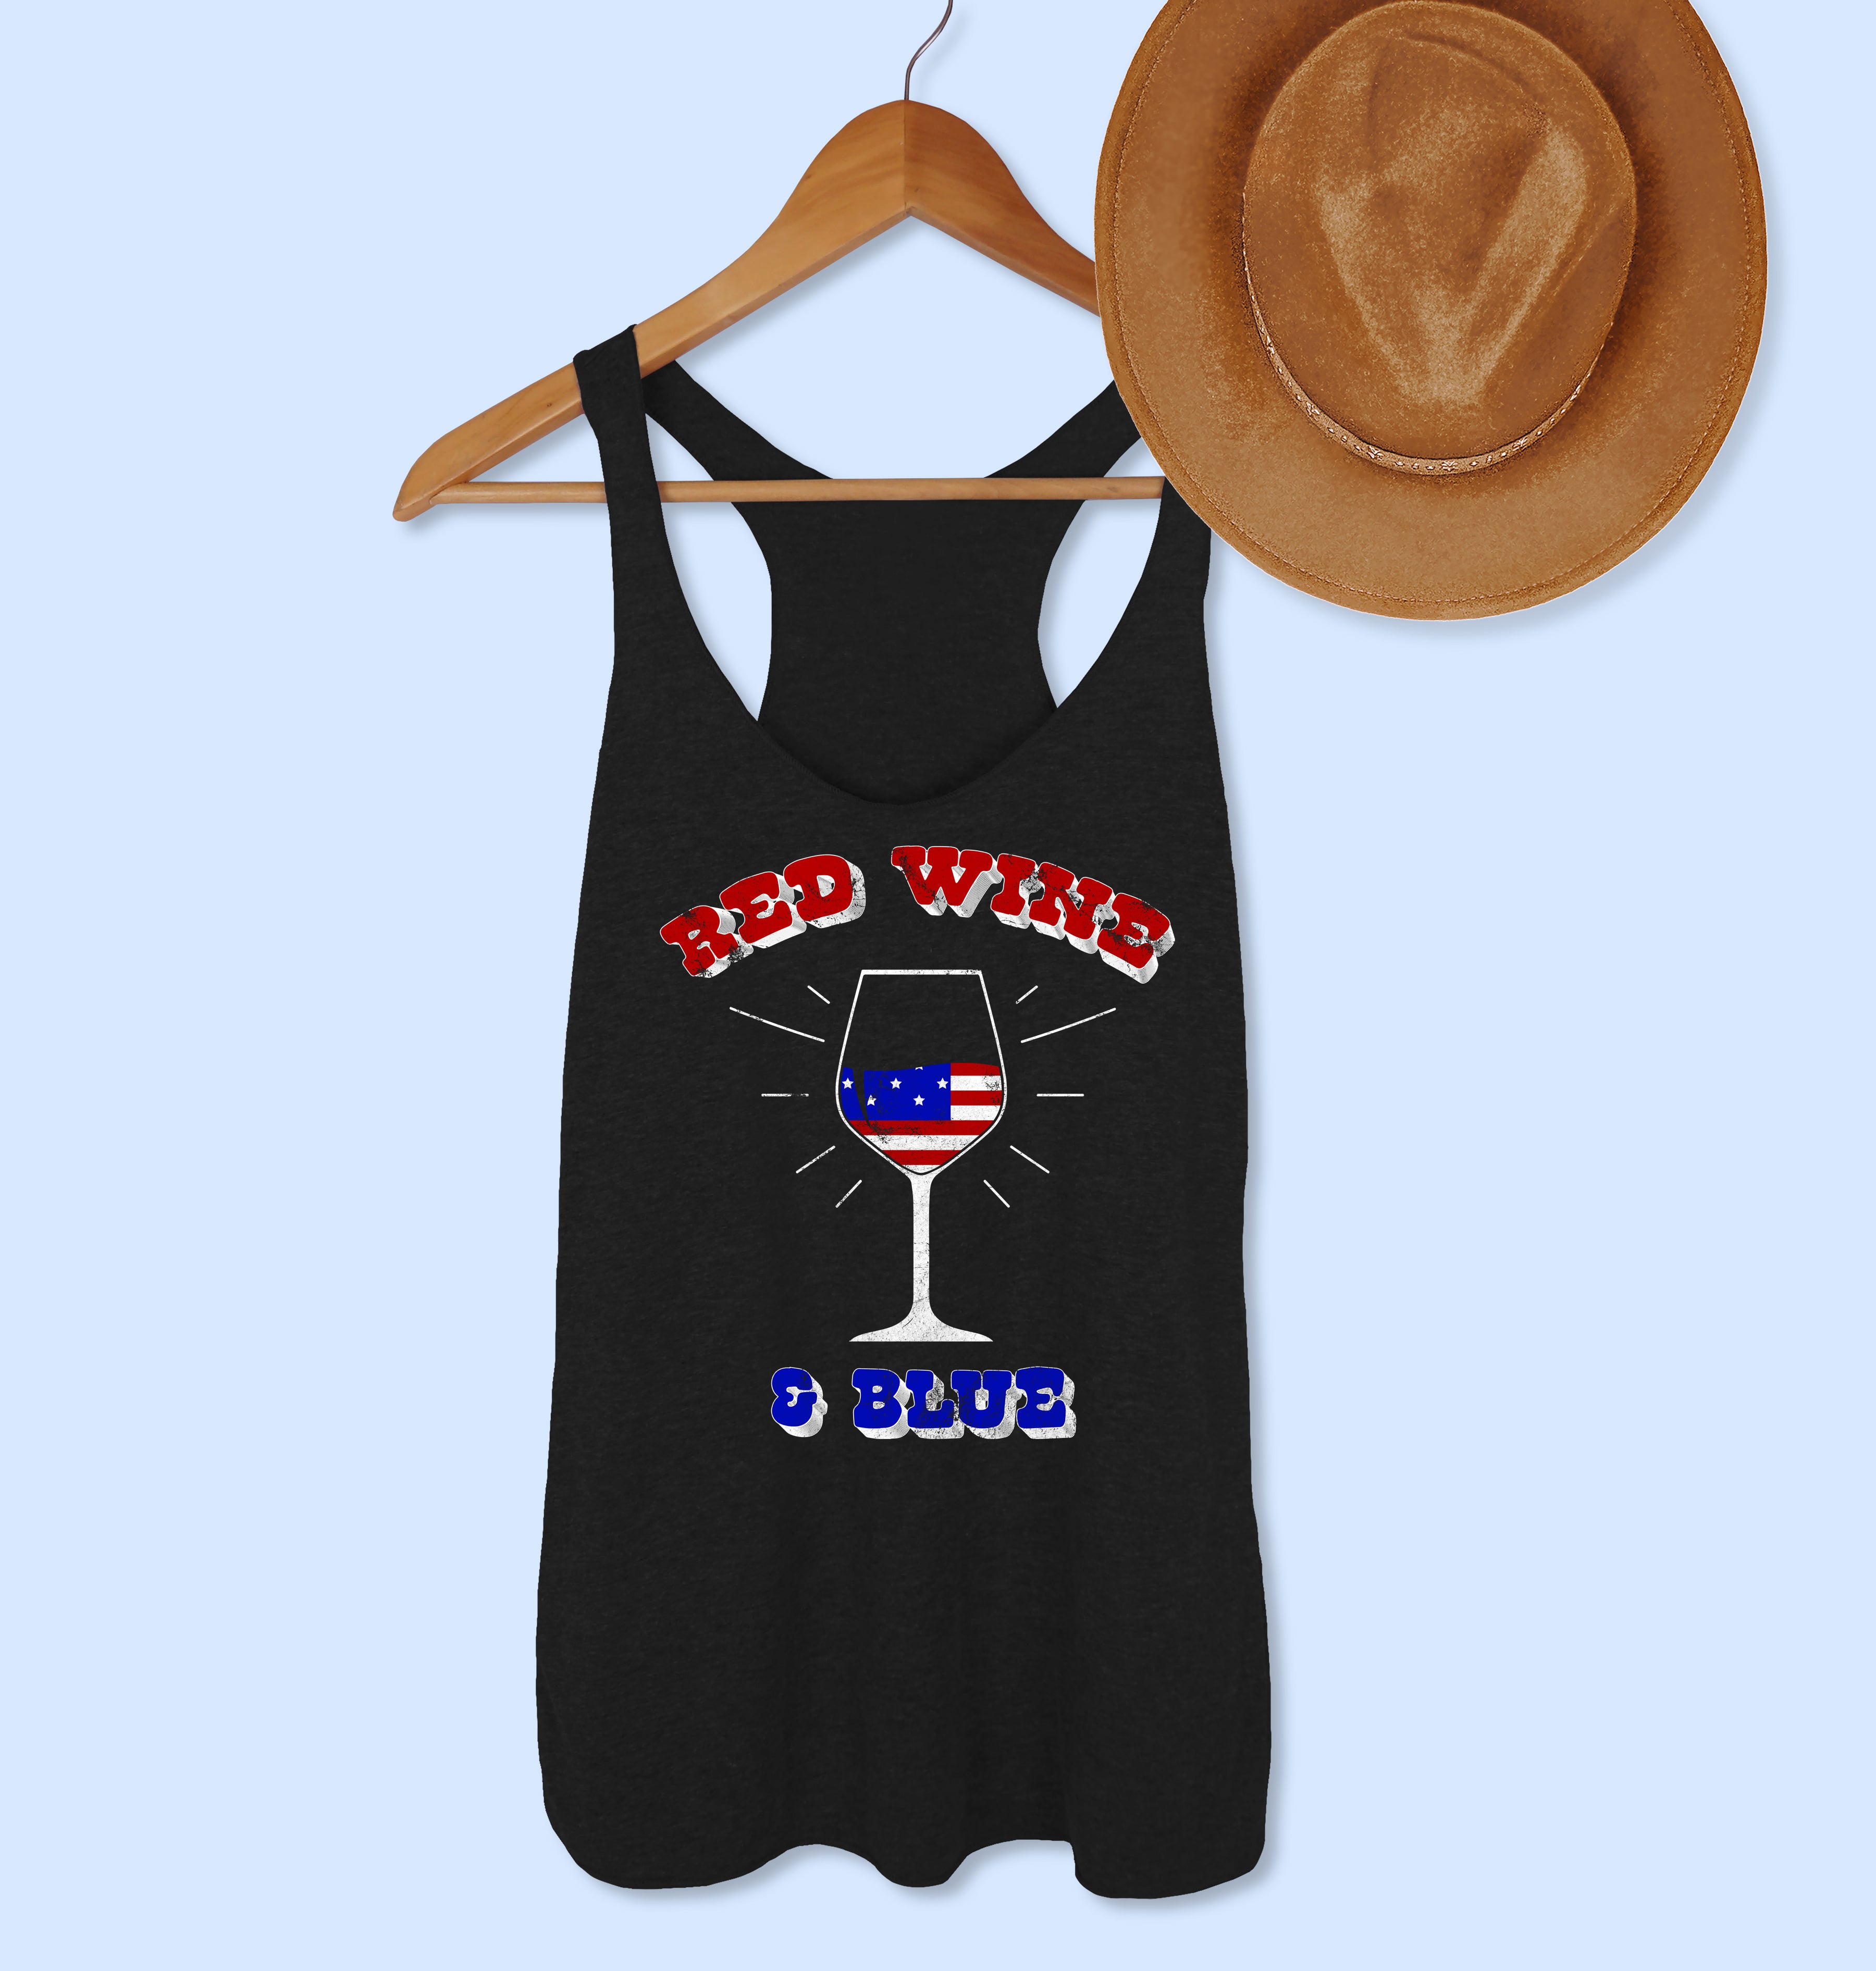 Black tank with a wine glass that says red wine and blue - HighCiti